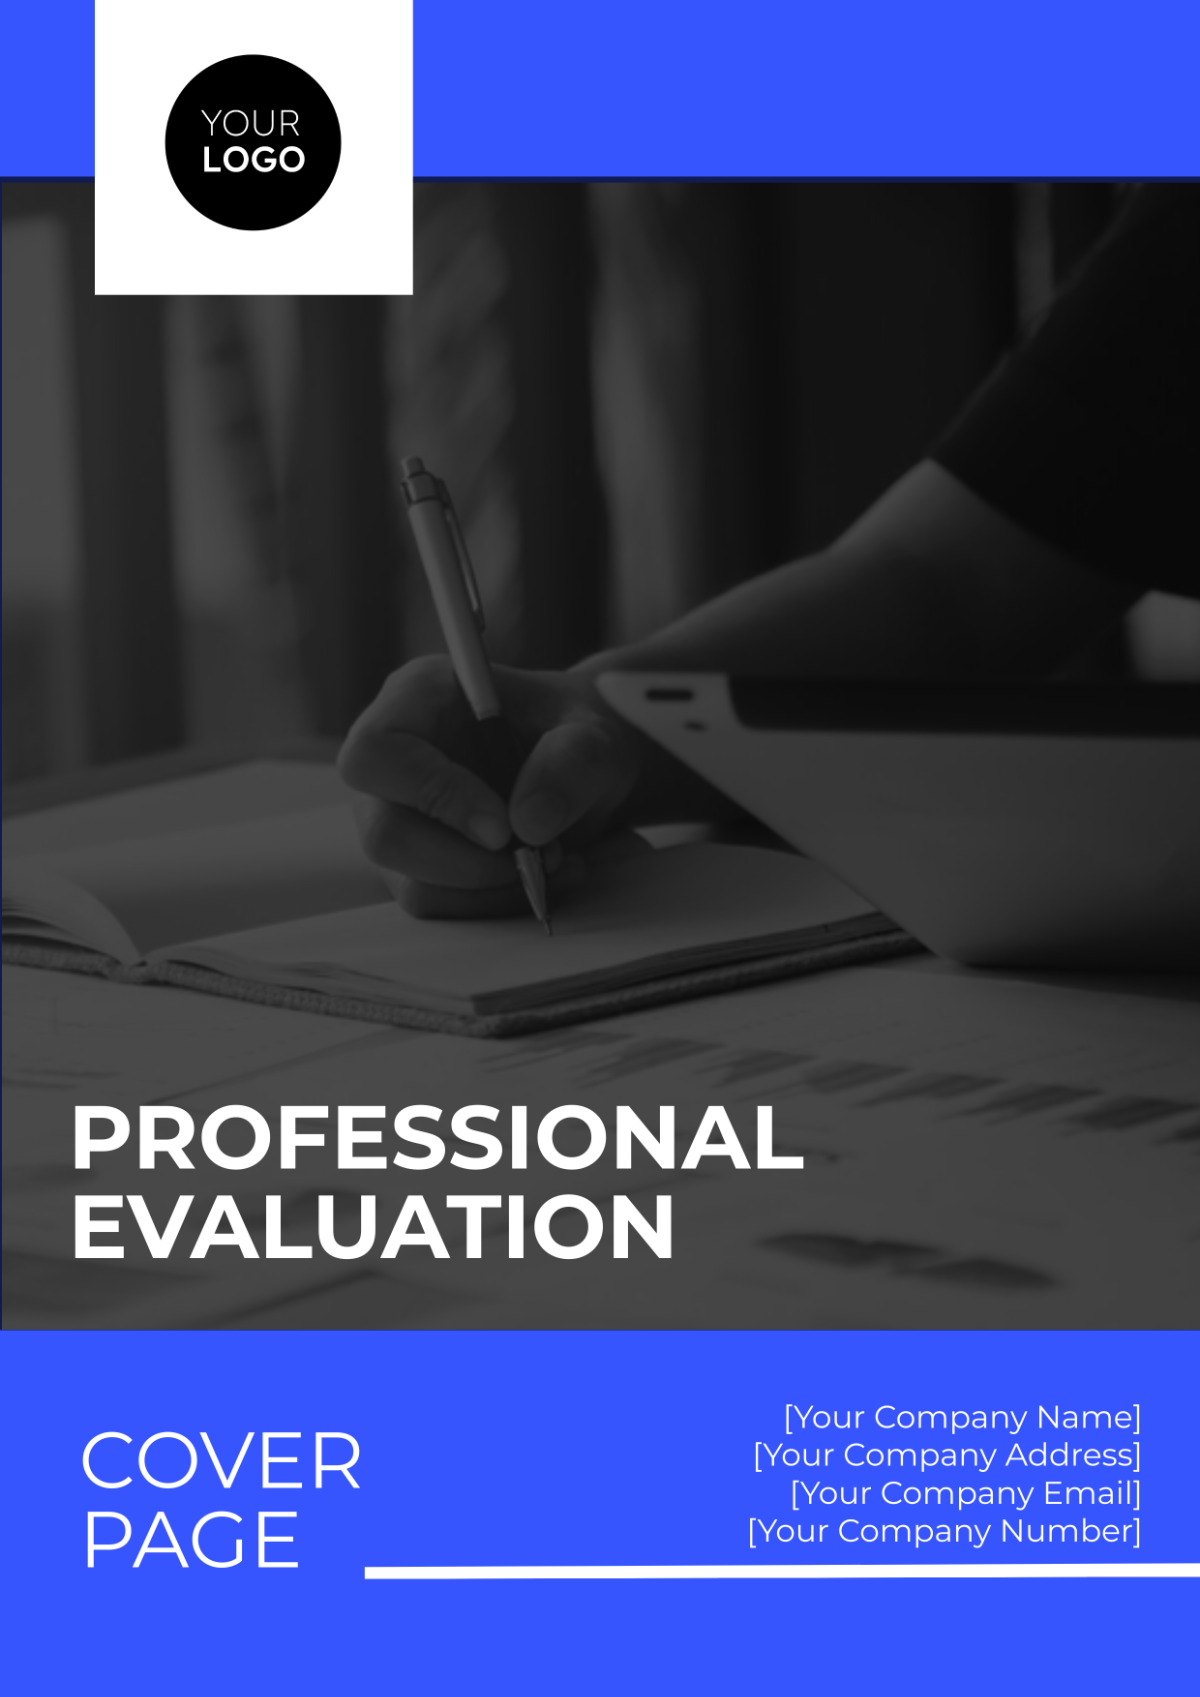 Professional Evaluation Cover Page